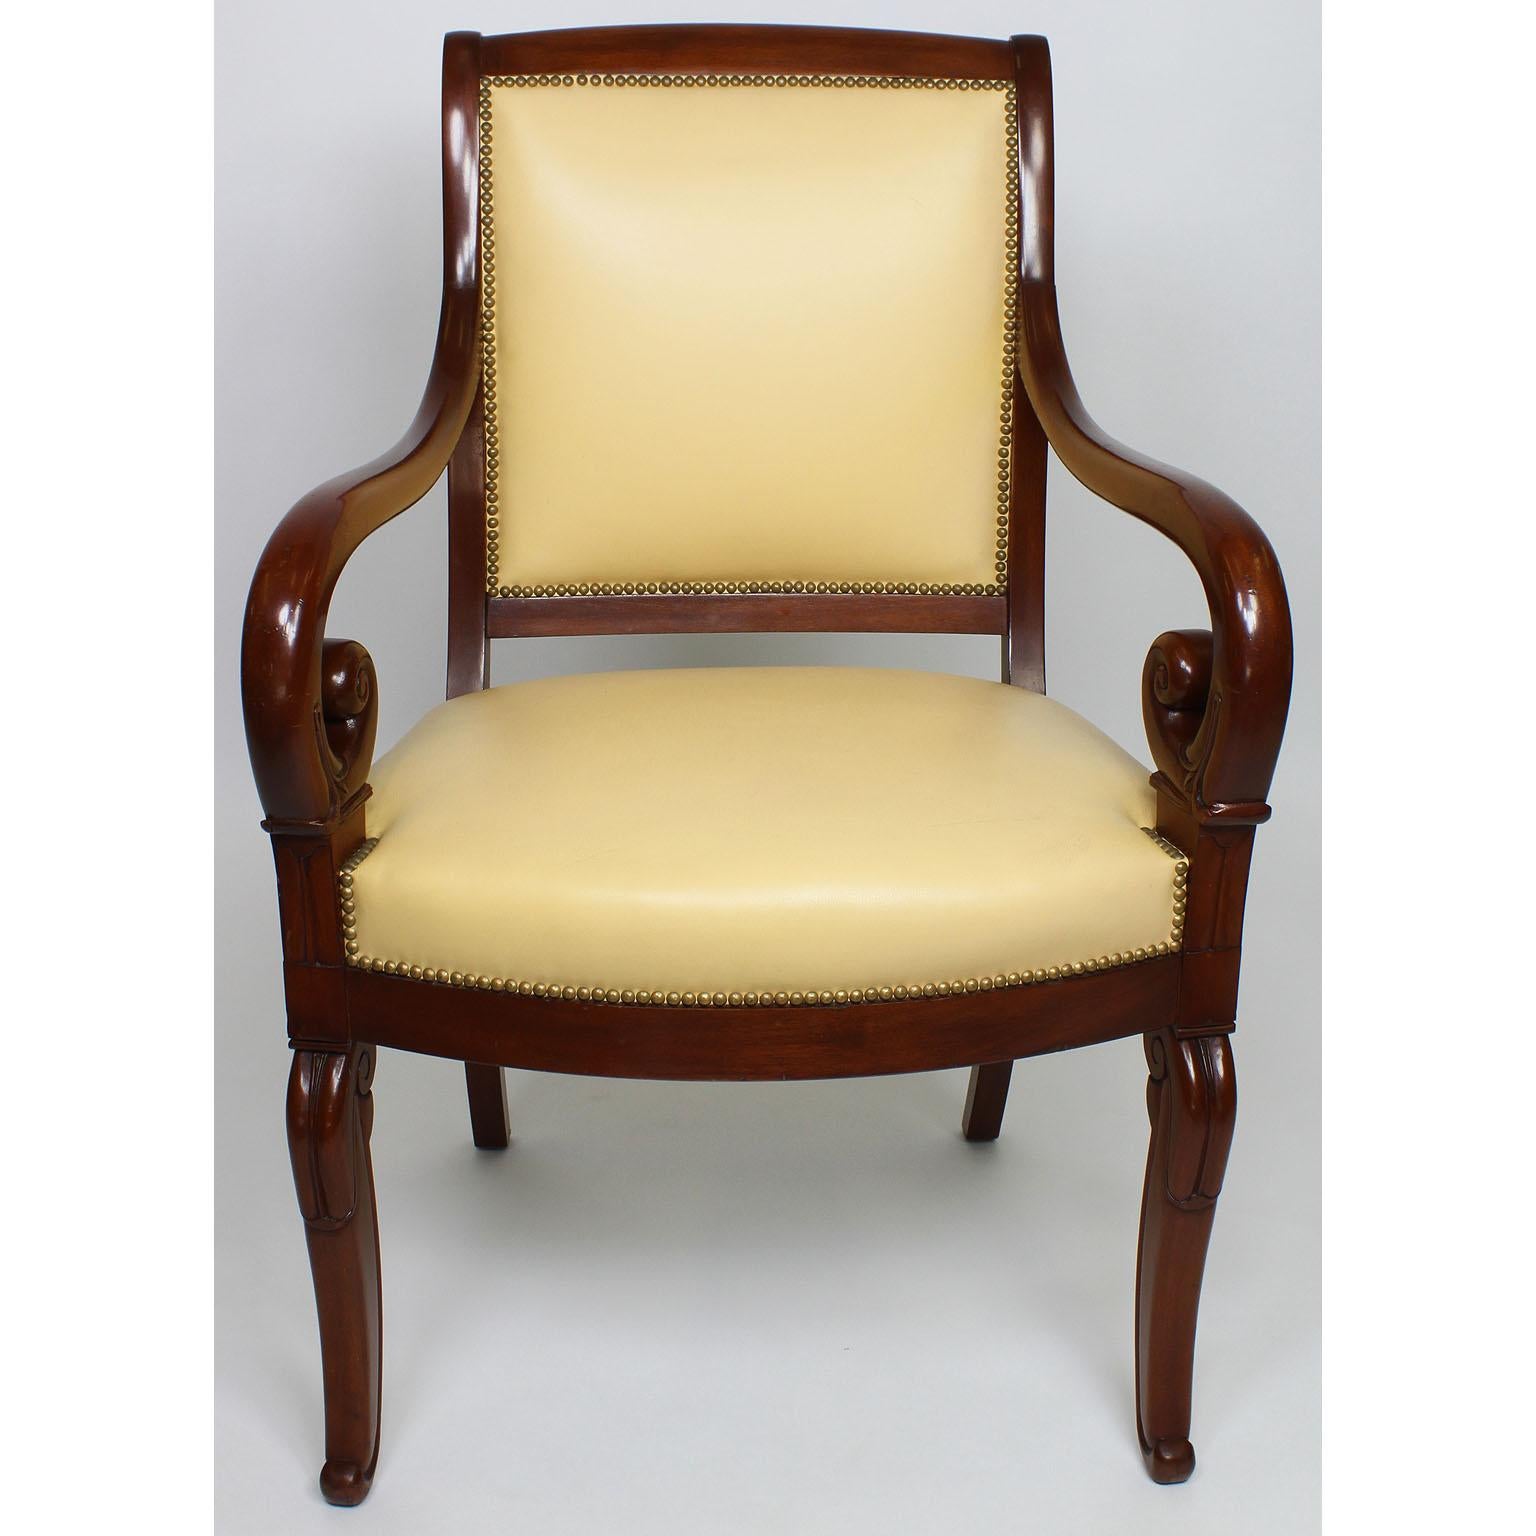 A fine pair of French early 20th century Regency style mahogany carved armchairs, each upholstered in a light cream color pleather, Paris, circa 1920s.

Measures: Height 38 3/4 inches (98.4 cm)
Width 24 3/4 inches (62.9 cm)
Depth 24 1/4 inches